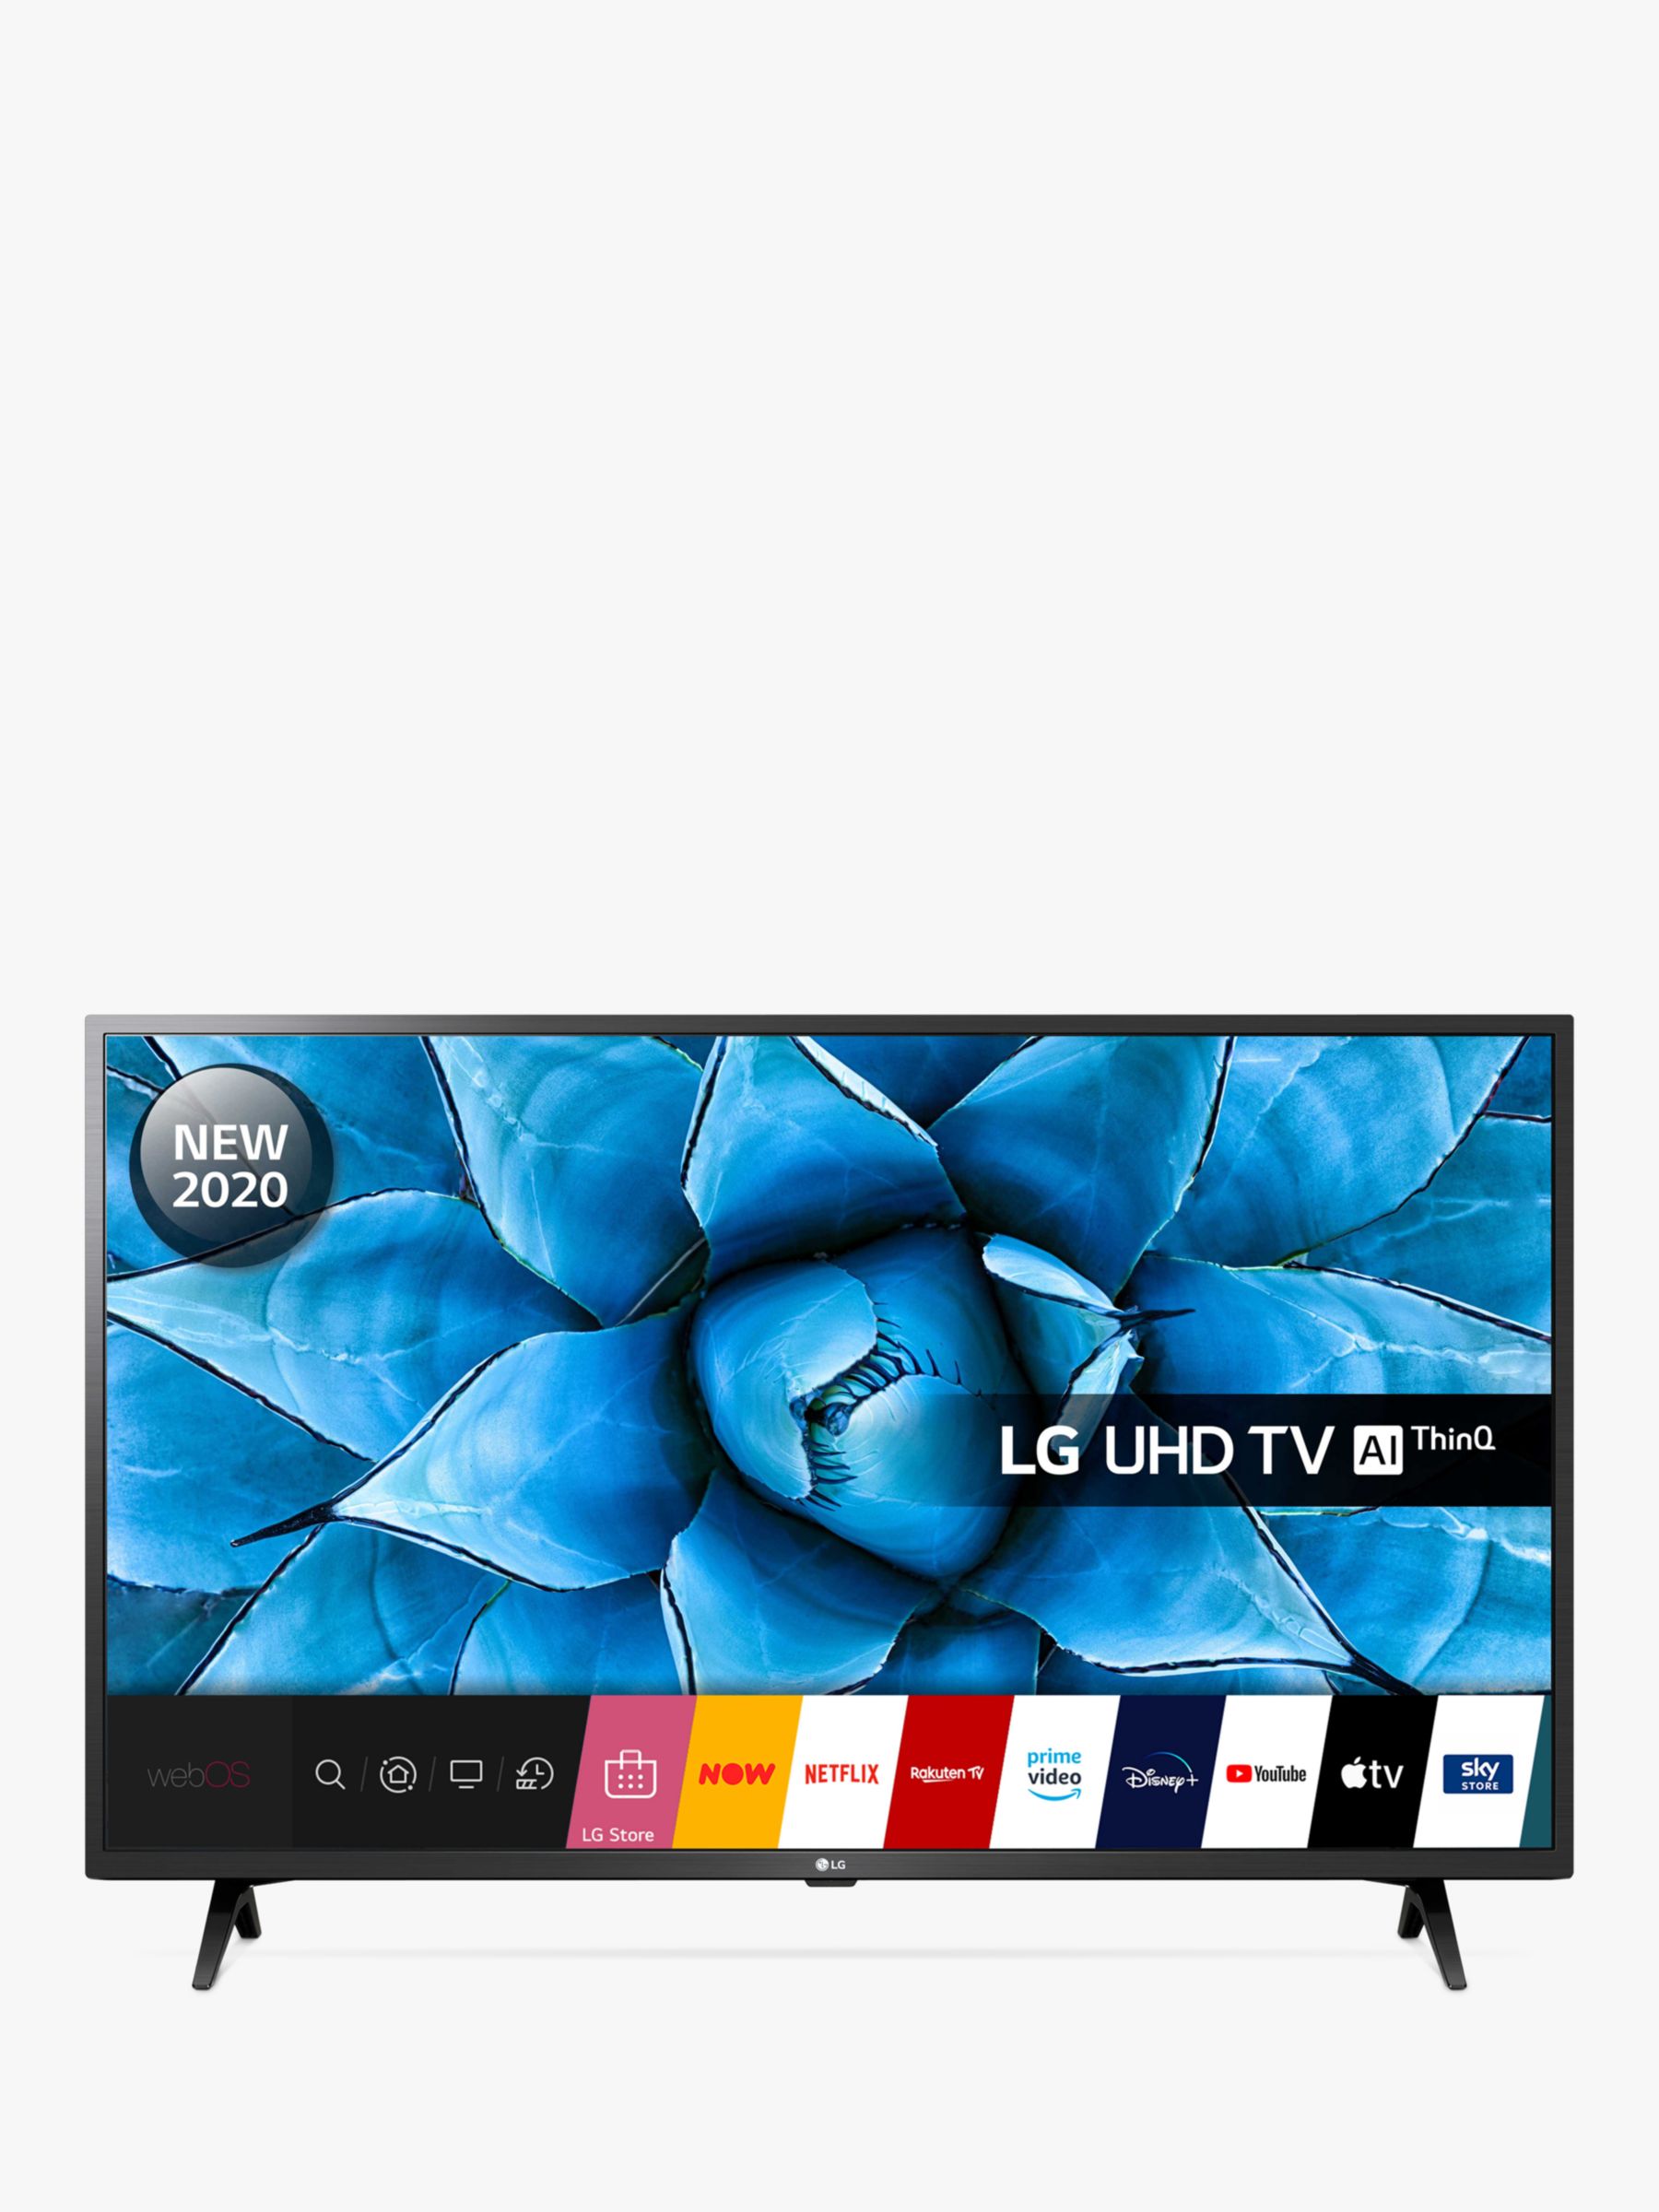 Lg 43un73006lc 2020 Led Hdr 4k Ultra Hd Smart Tv 43 Inch With Freeview Hd Freesat Hd Ceramic Black At John Lewis Partners